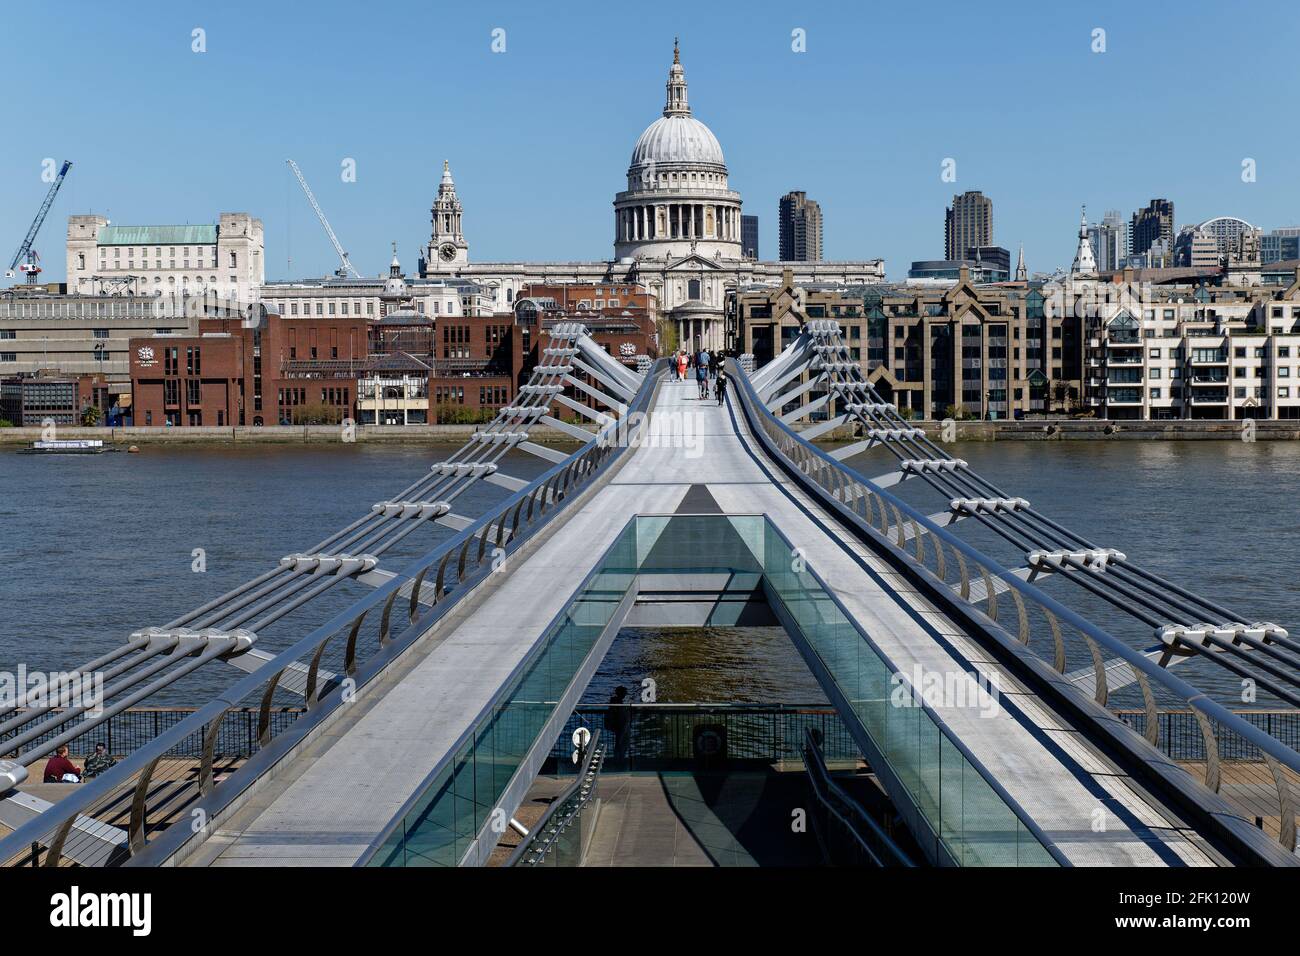 A slightly elevated view across the Millennium Bridge to St Pauls Cathedral from the South bank of the River Thames in London Stock Photo